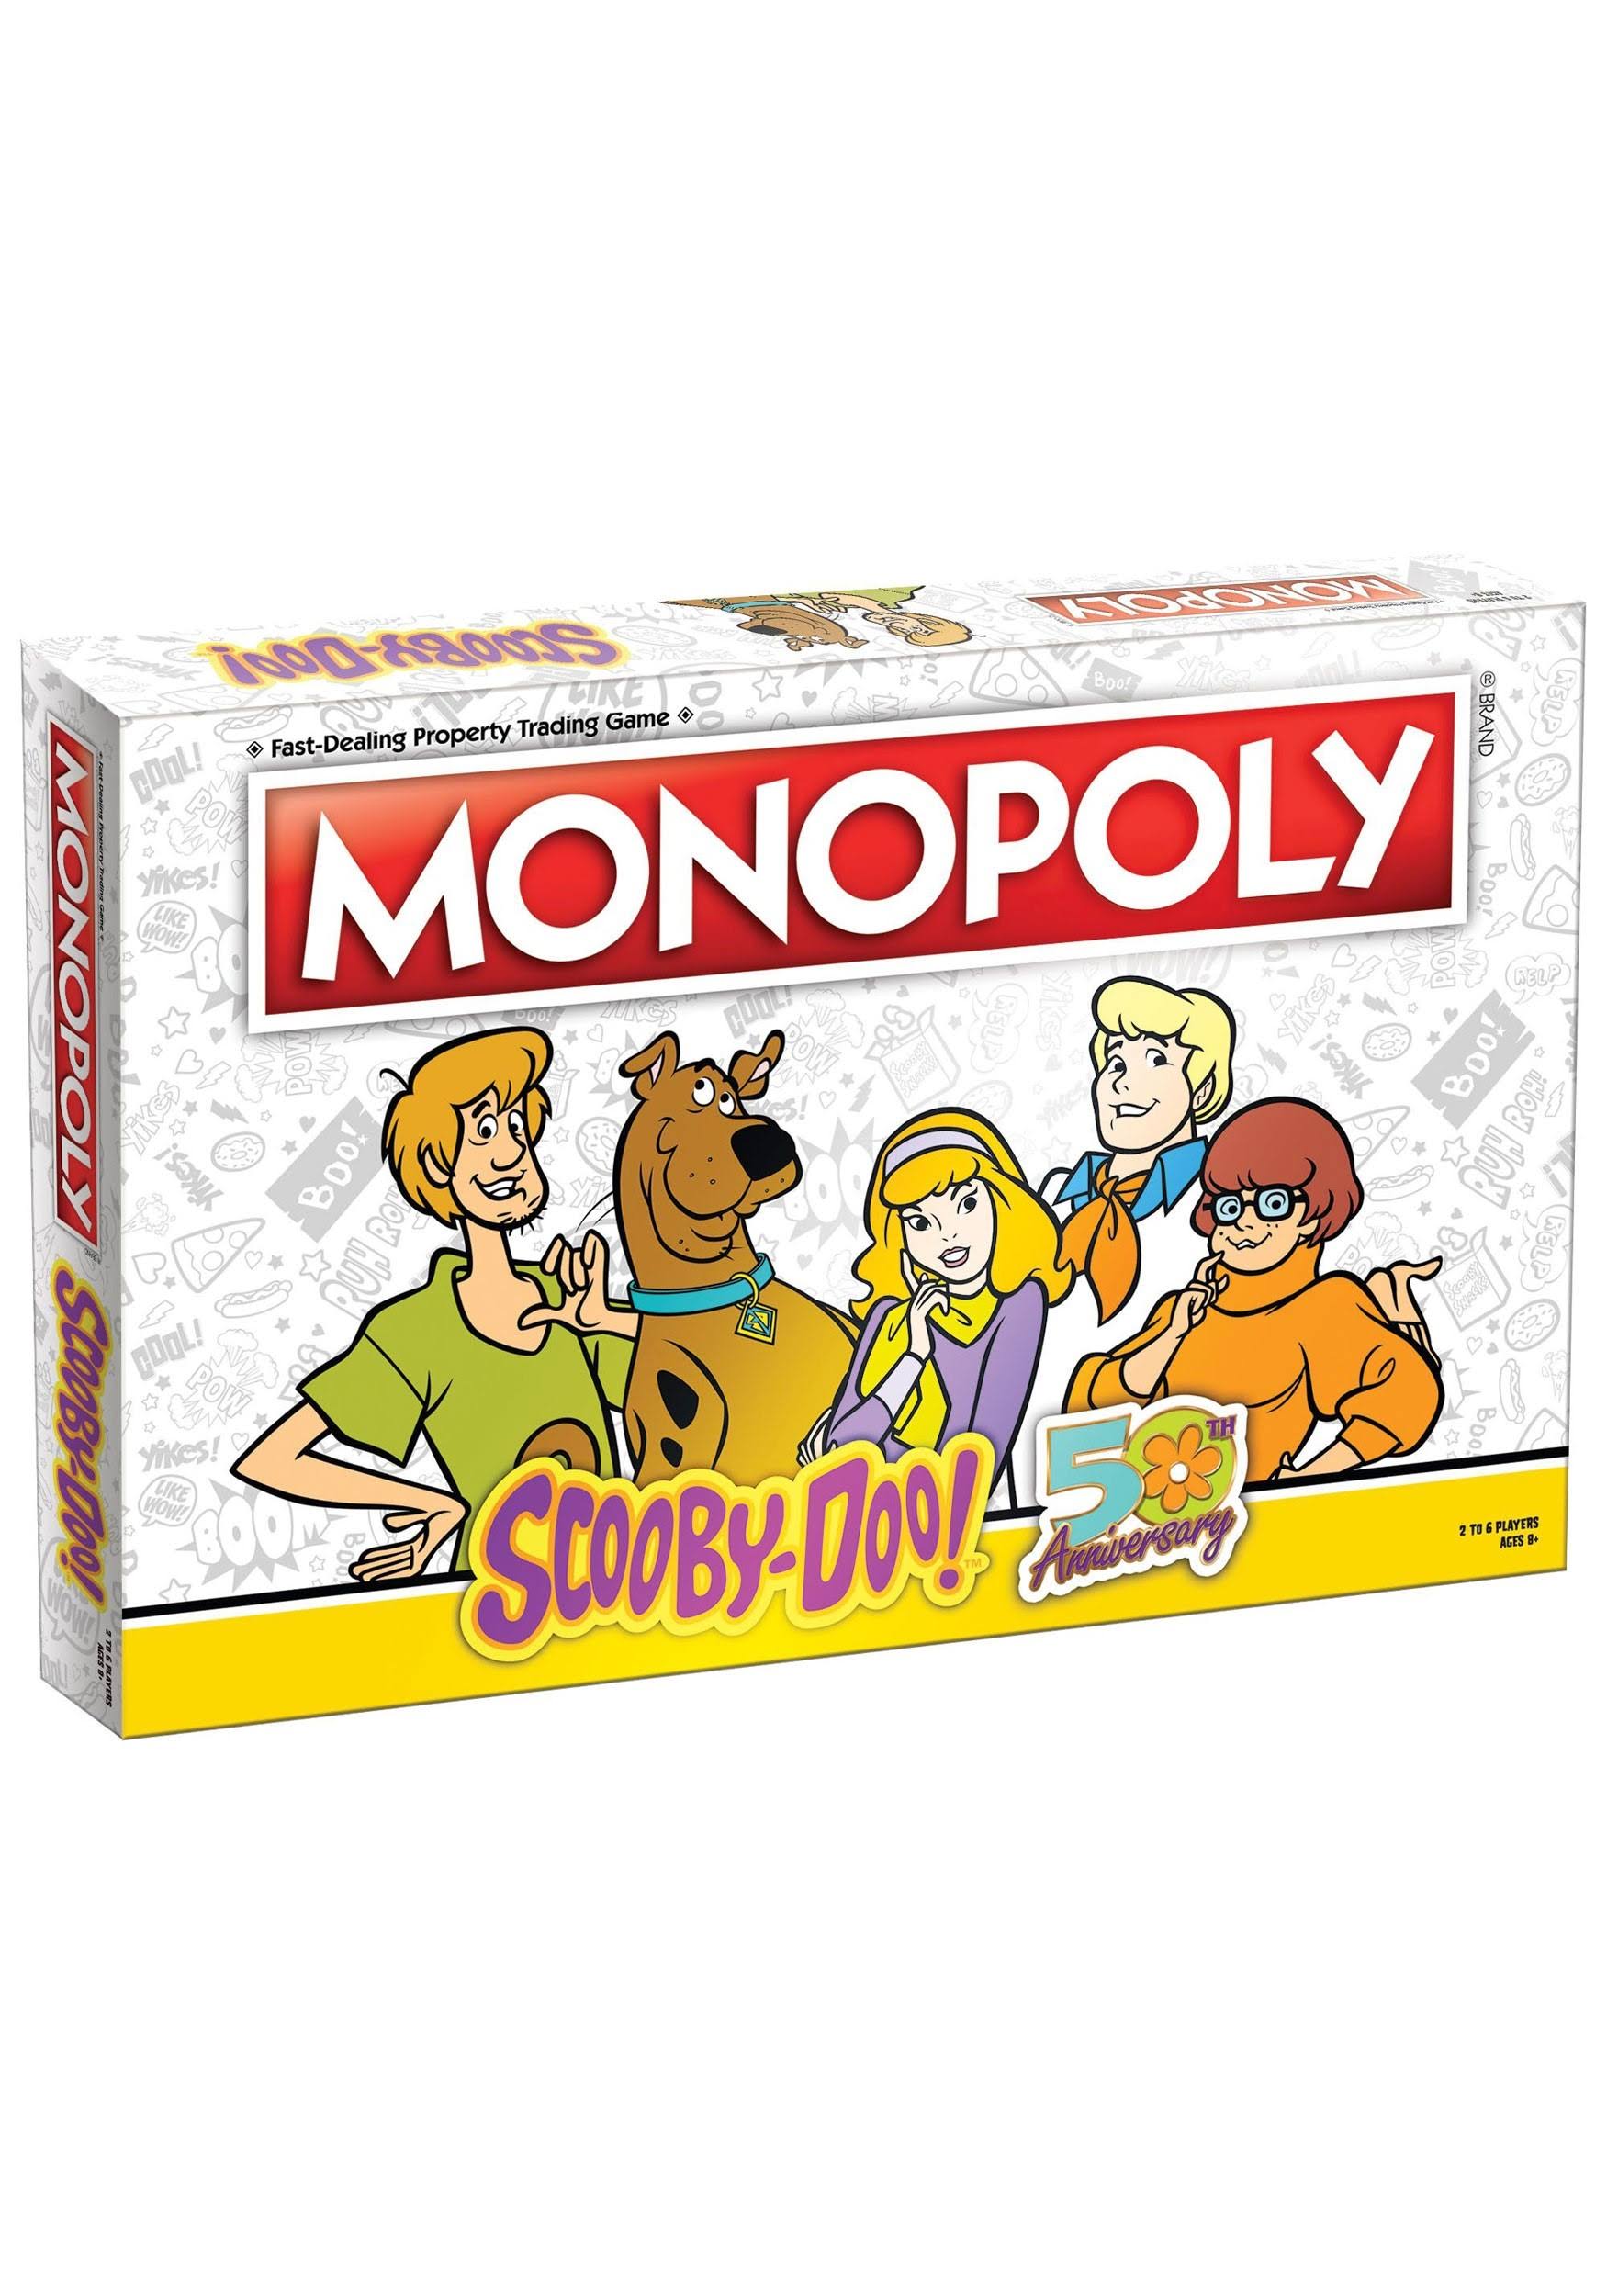 Monopoly Scooby Doo 50th Edition Board Game